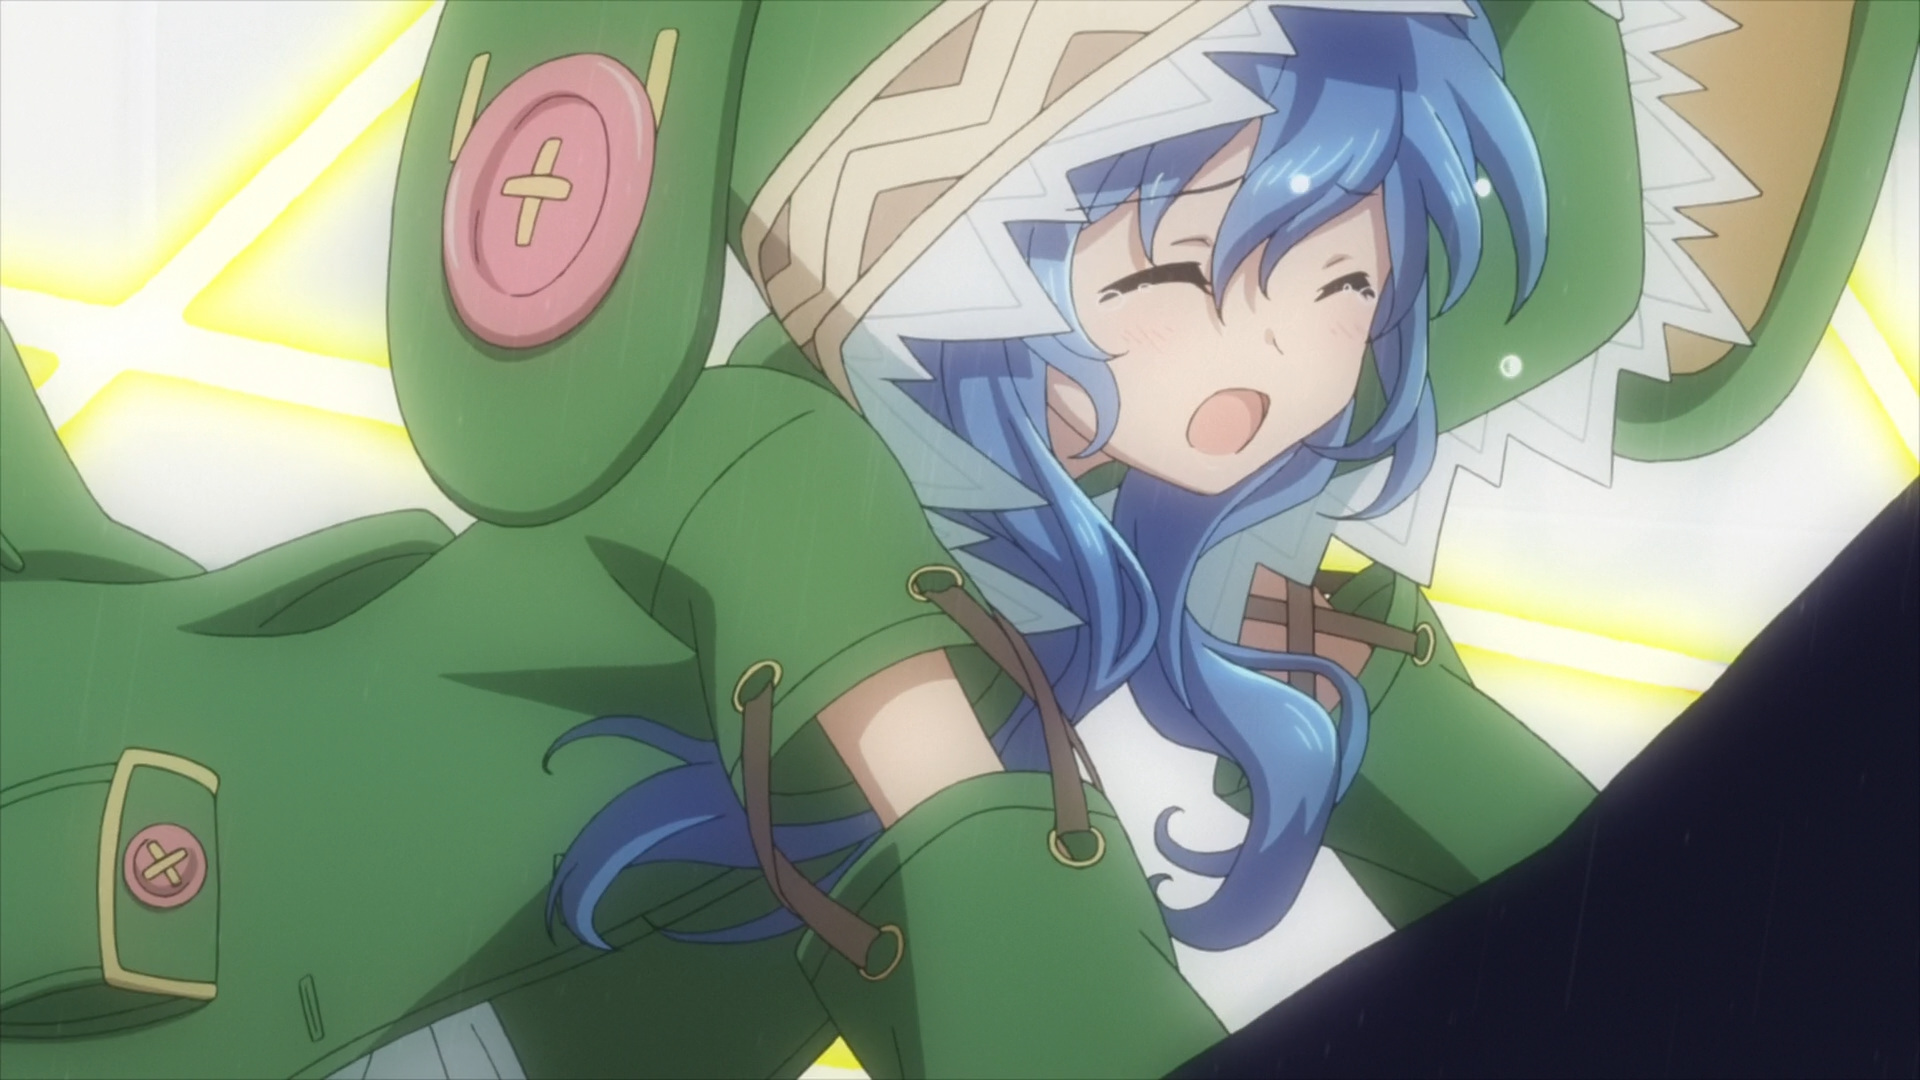 Yoshino has been freed from the cruel fate that haunts all Spirits. 